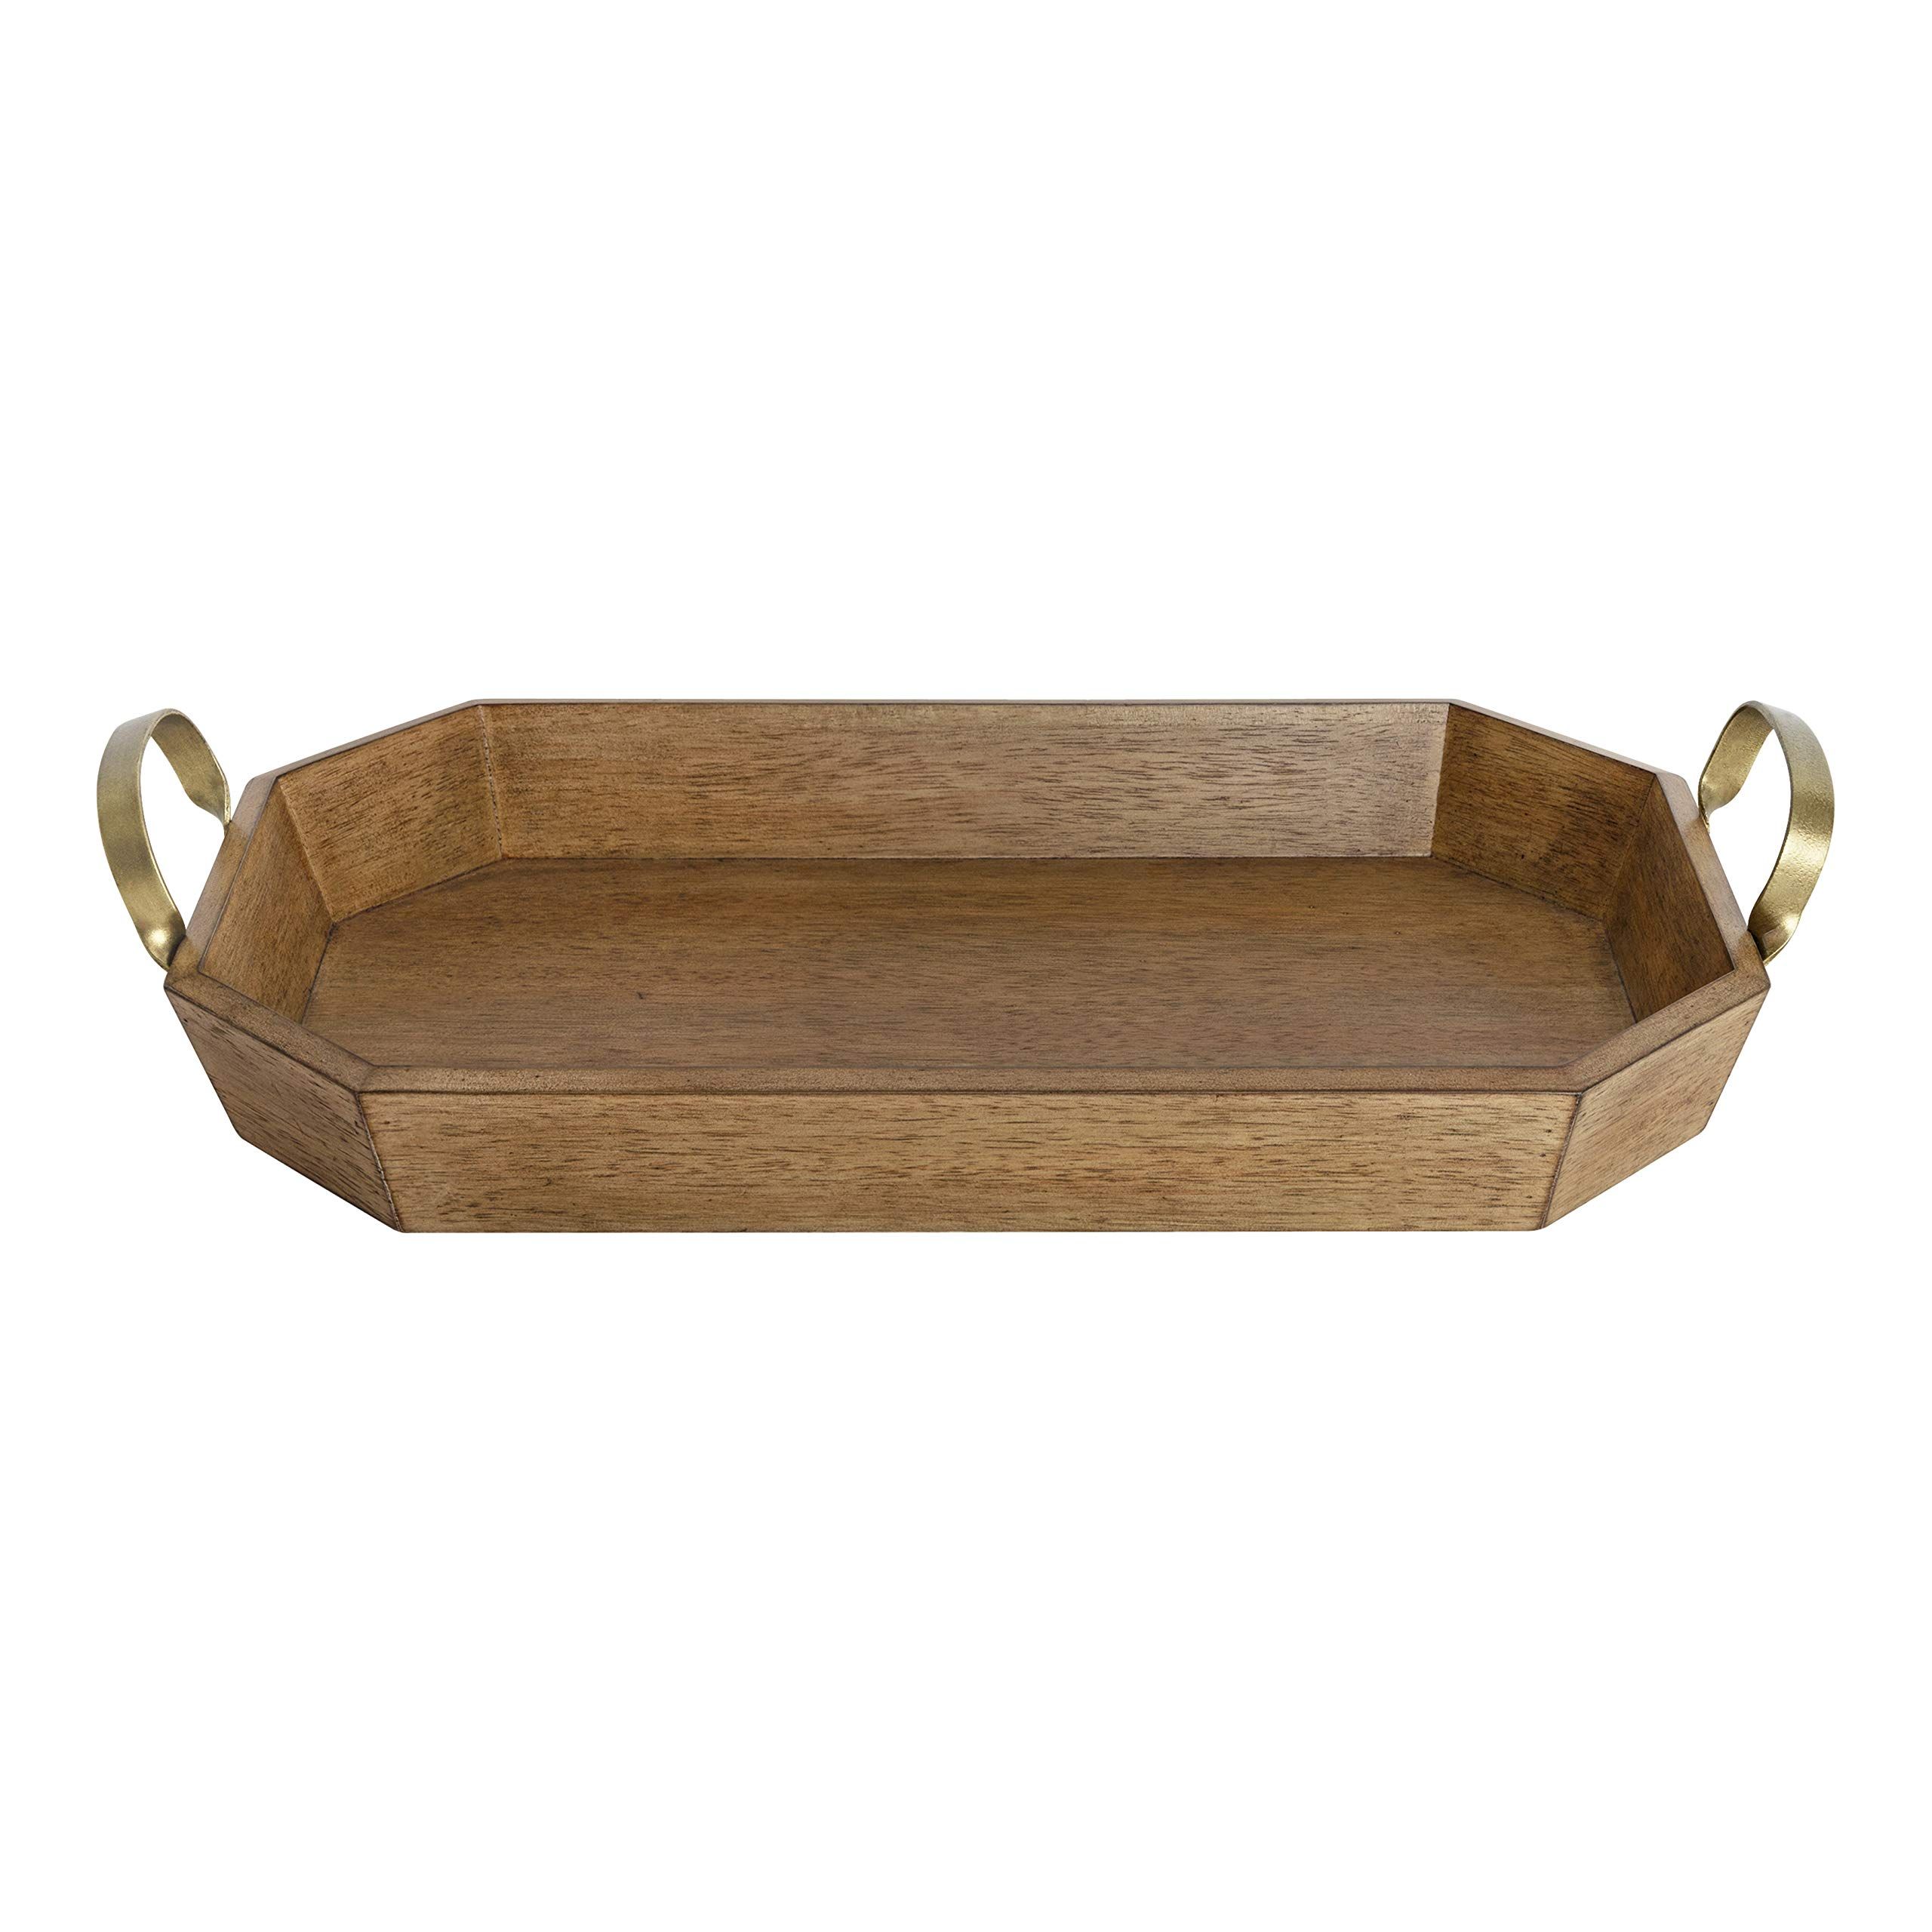 Kate and Laurel Atchison Farmhouse Tray, 21x12, Brown, Rustic Accent Tray for Display and Storage | Amazon (US)